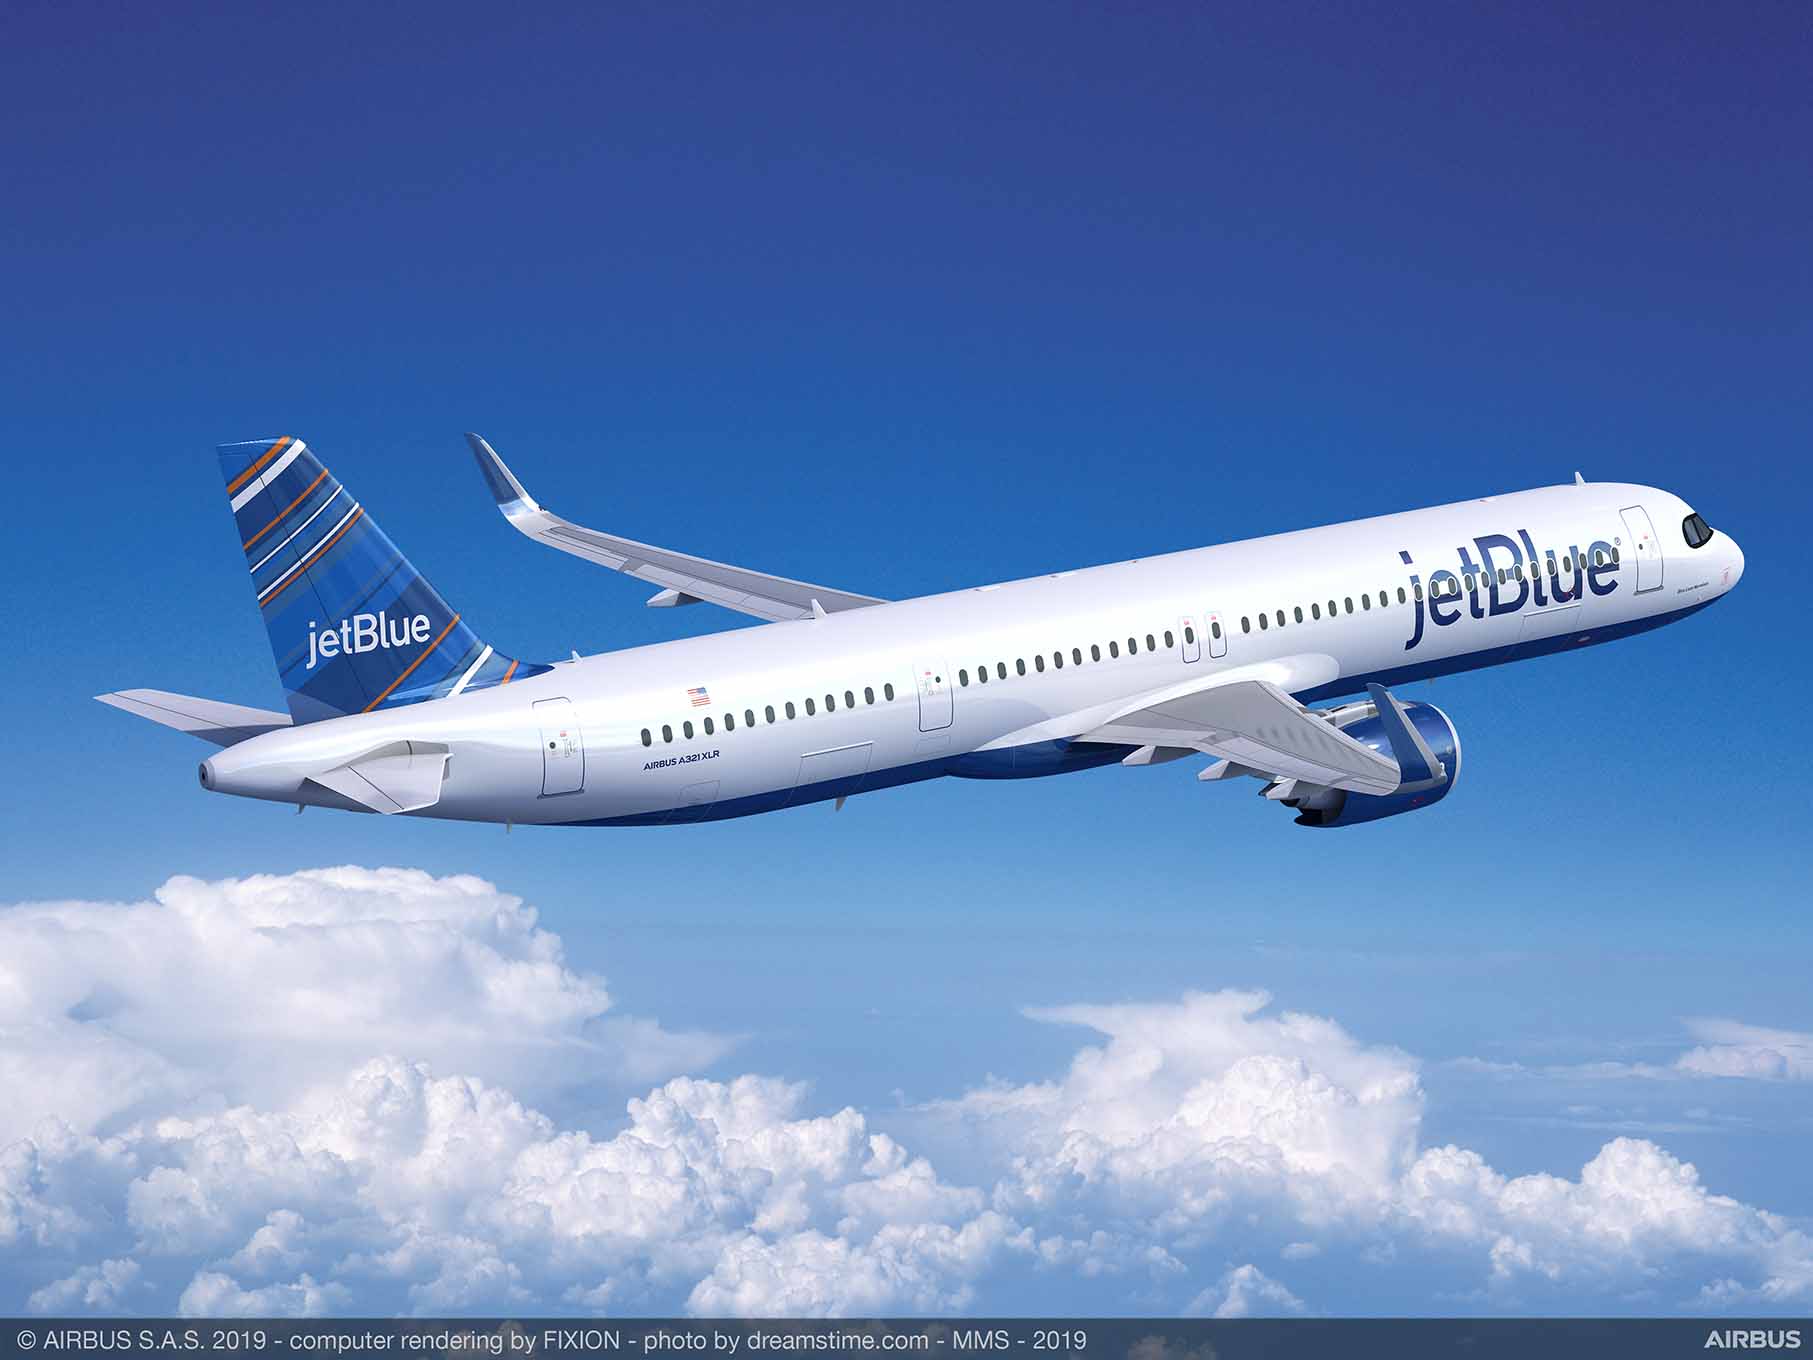 JetBlue goes Green – carrier starts offsetting carbon on domestic flights